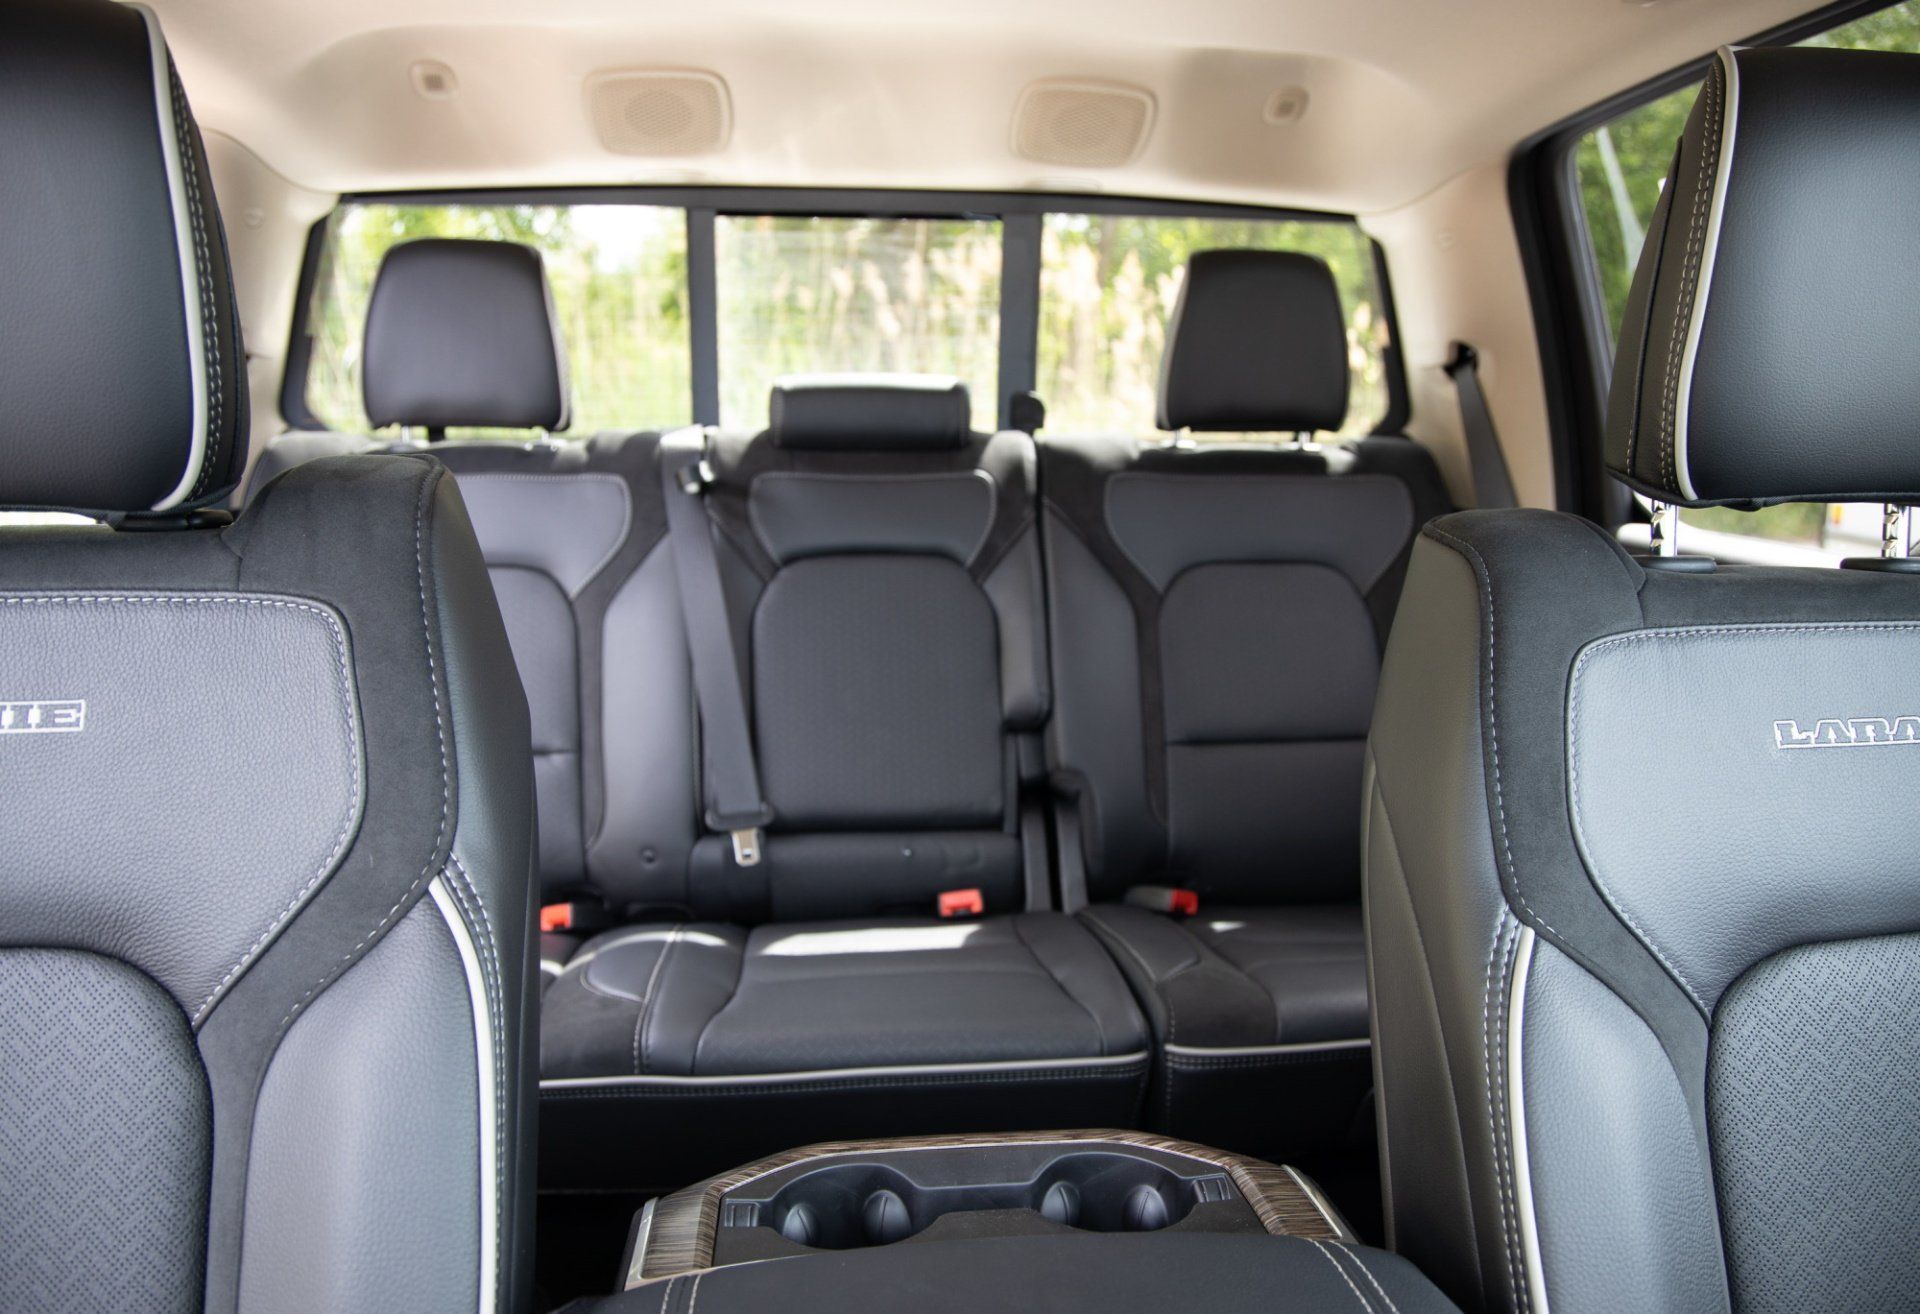 The rear seats of a ram truck are shown